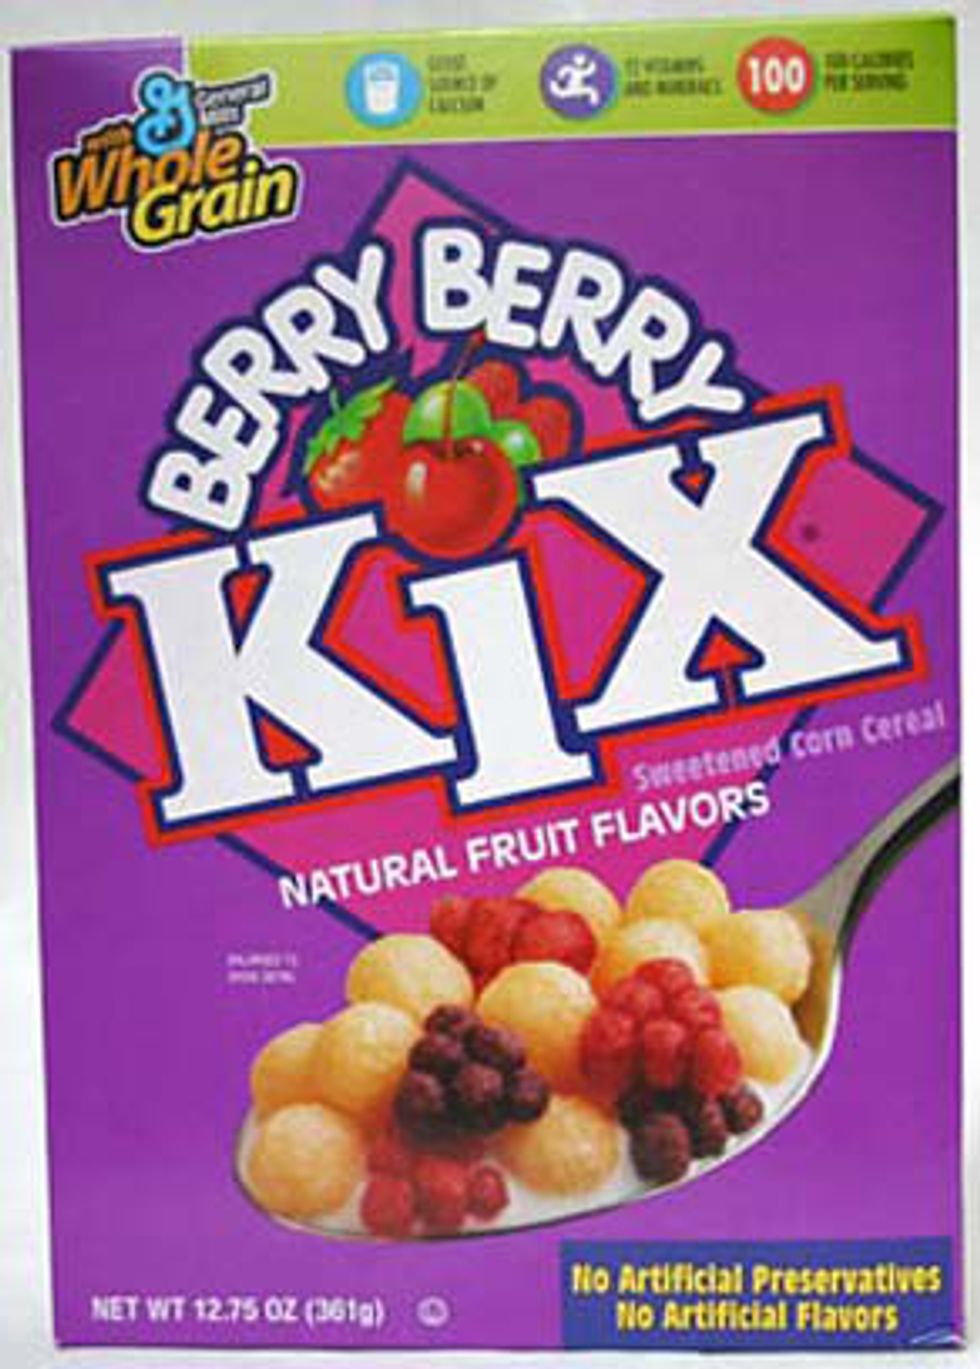 Early 2000s nostalgia - berry berry kix 90s - 9 Whole Grain Berry 100 Net Wt 12.75 Oz 361g O Fun Calings Berry Kx Sweetened Corn Cereal Natural Fruit Flavors No Artificial Preservatives No Artificial Flavors